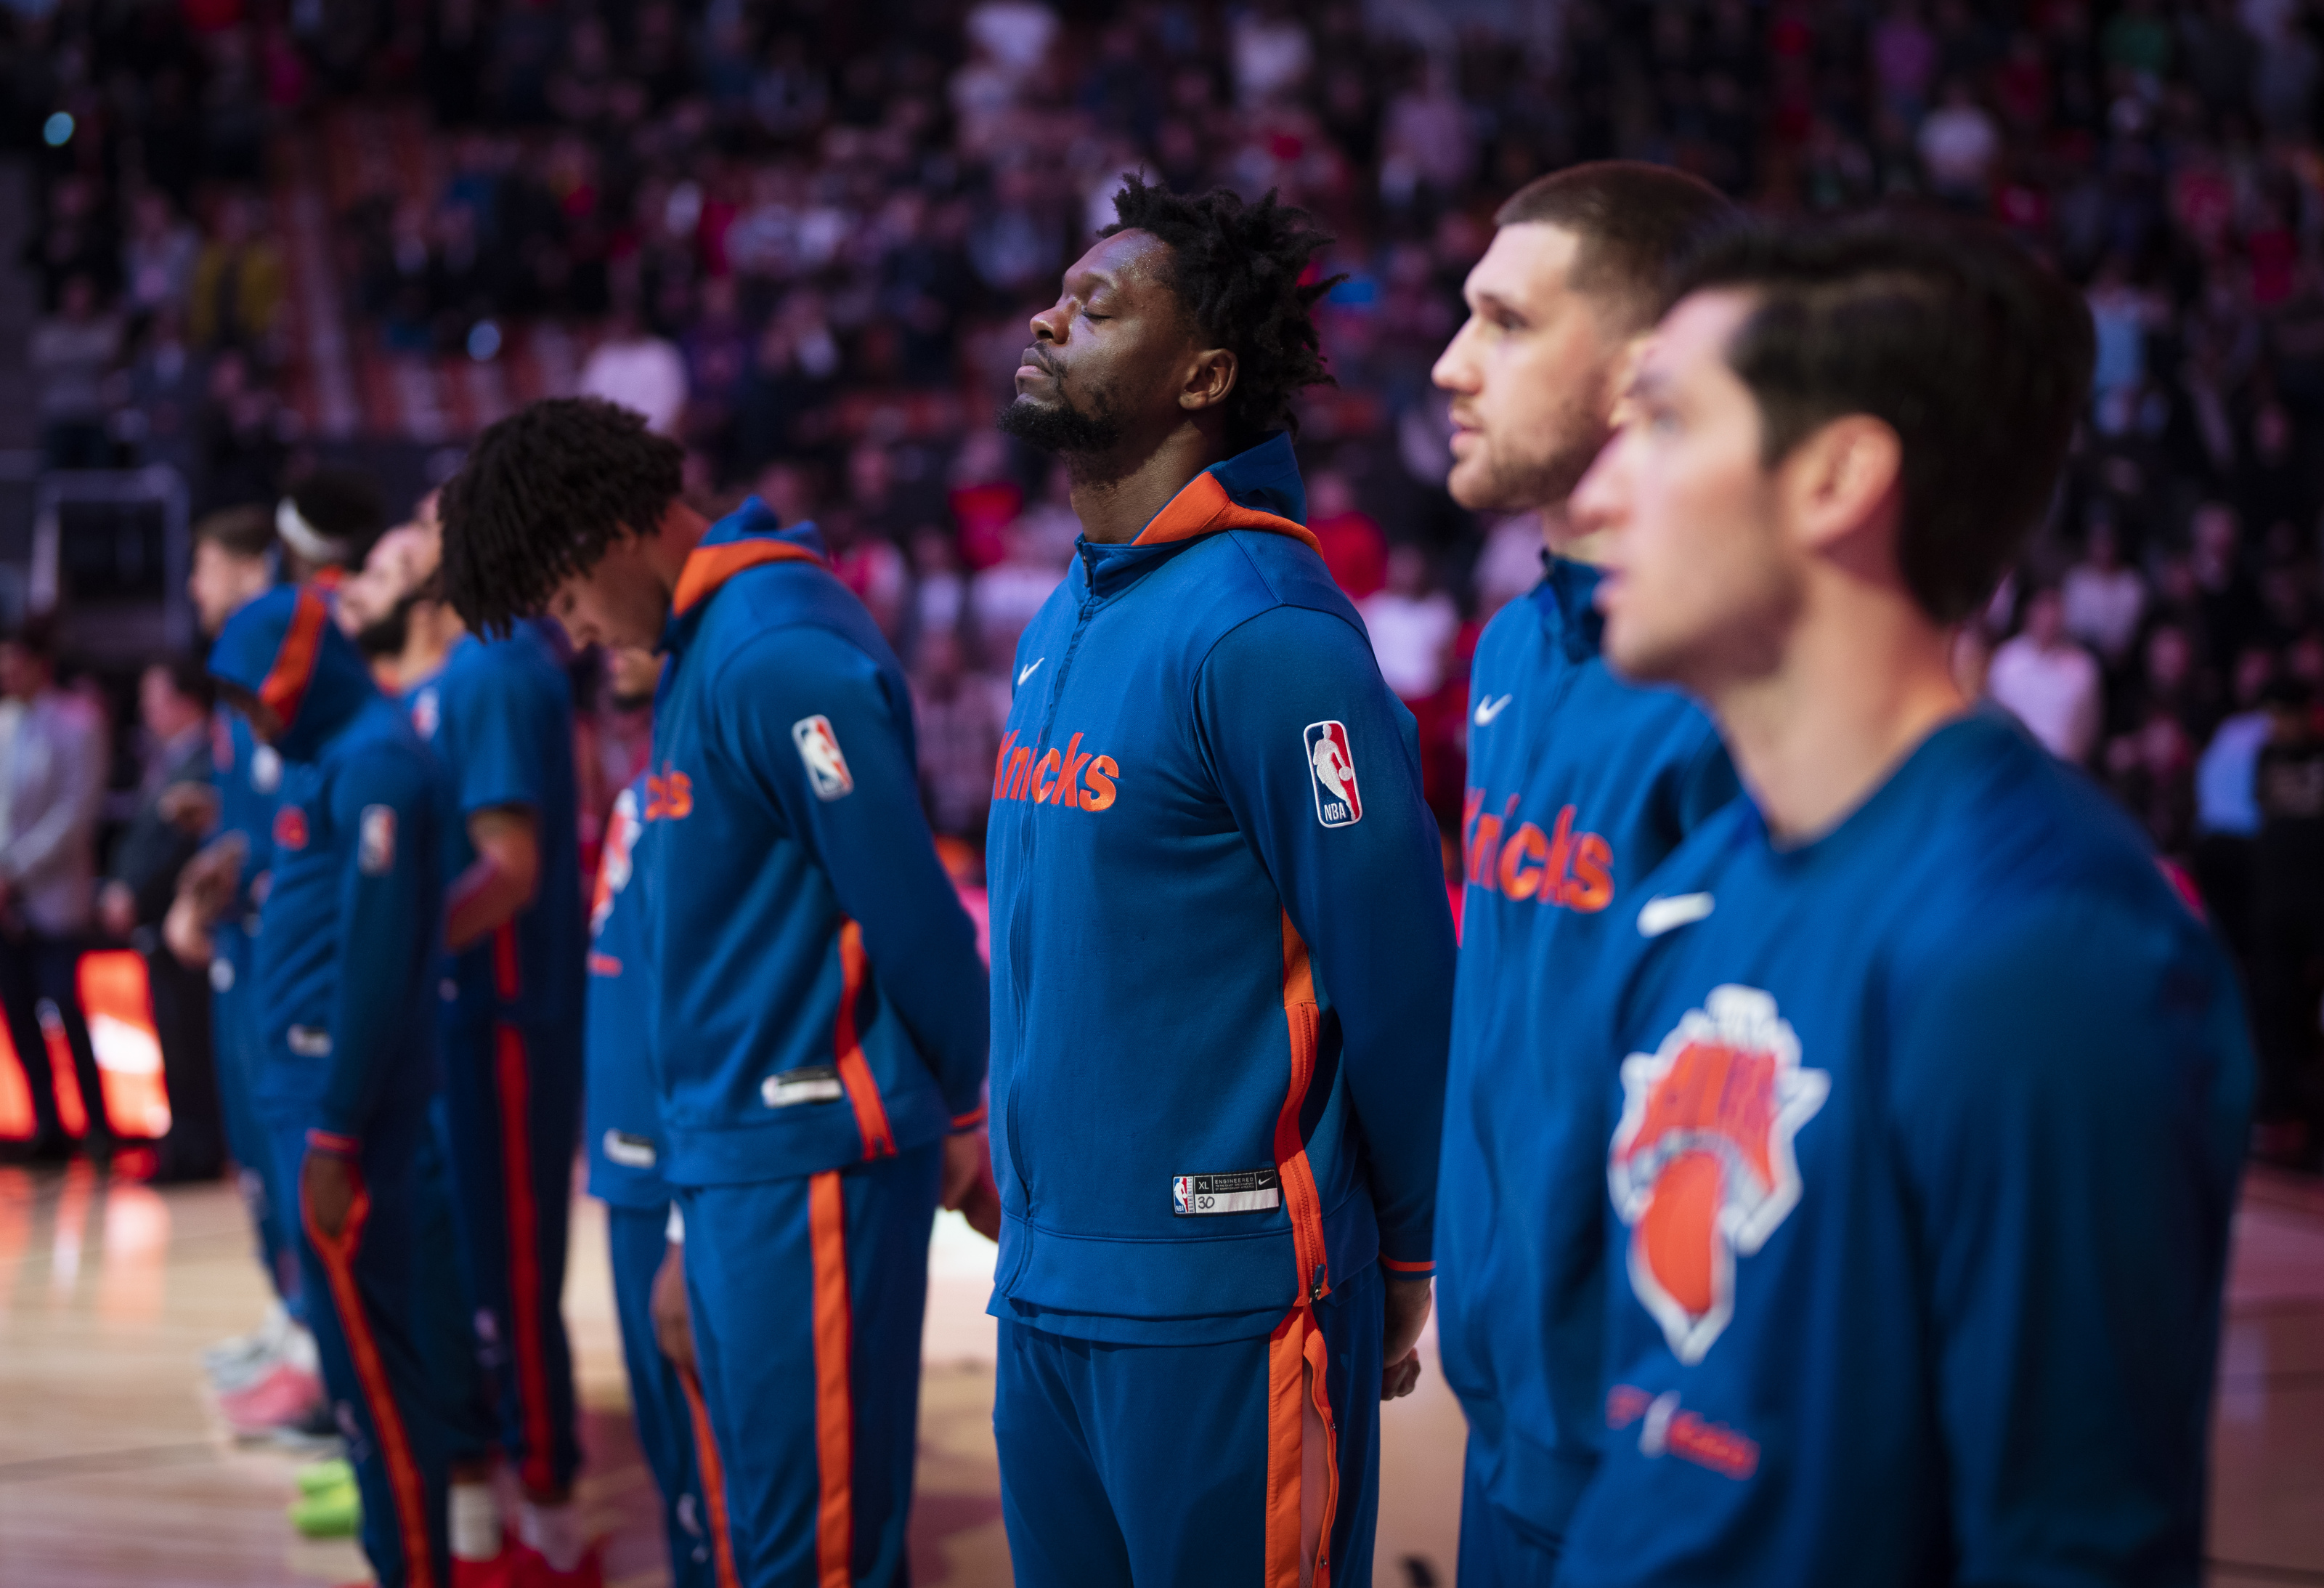 New York Knicks: Ranking the young core among other NBA teams